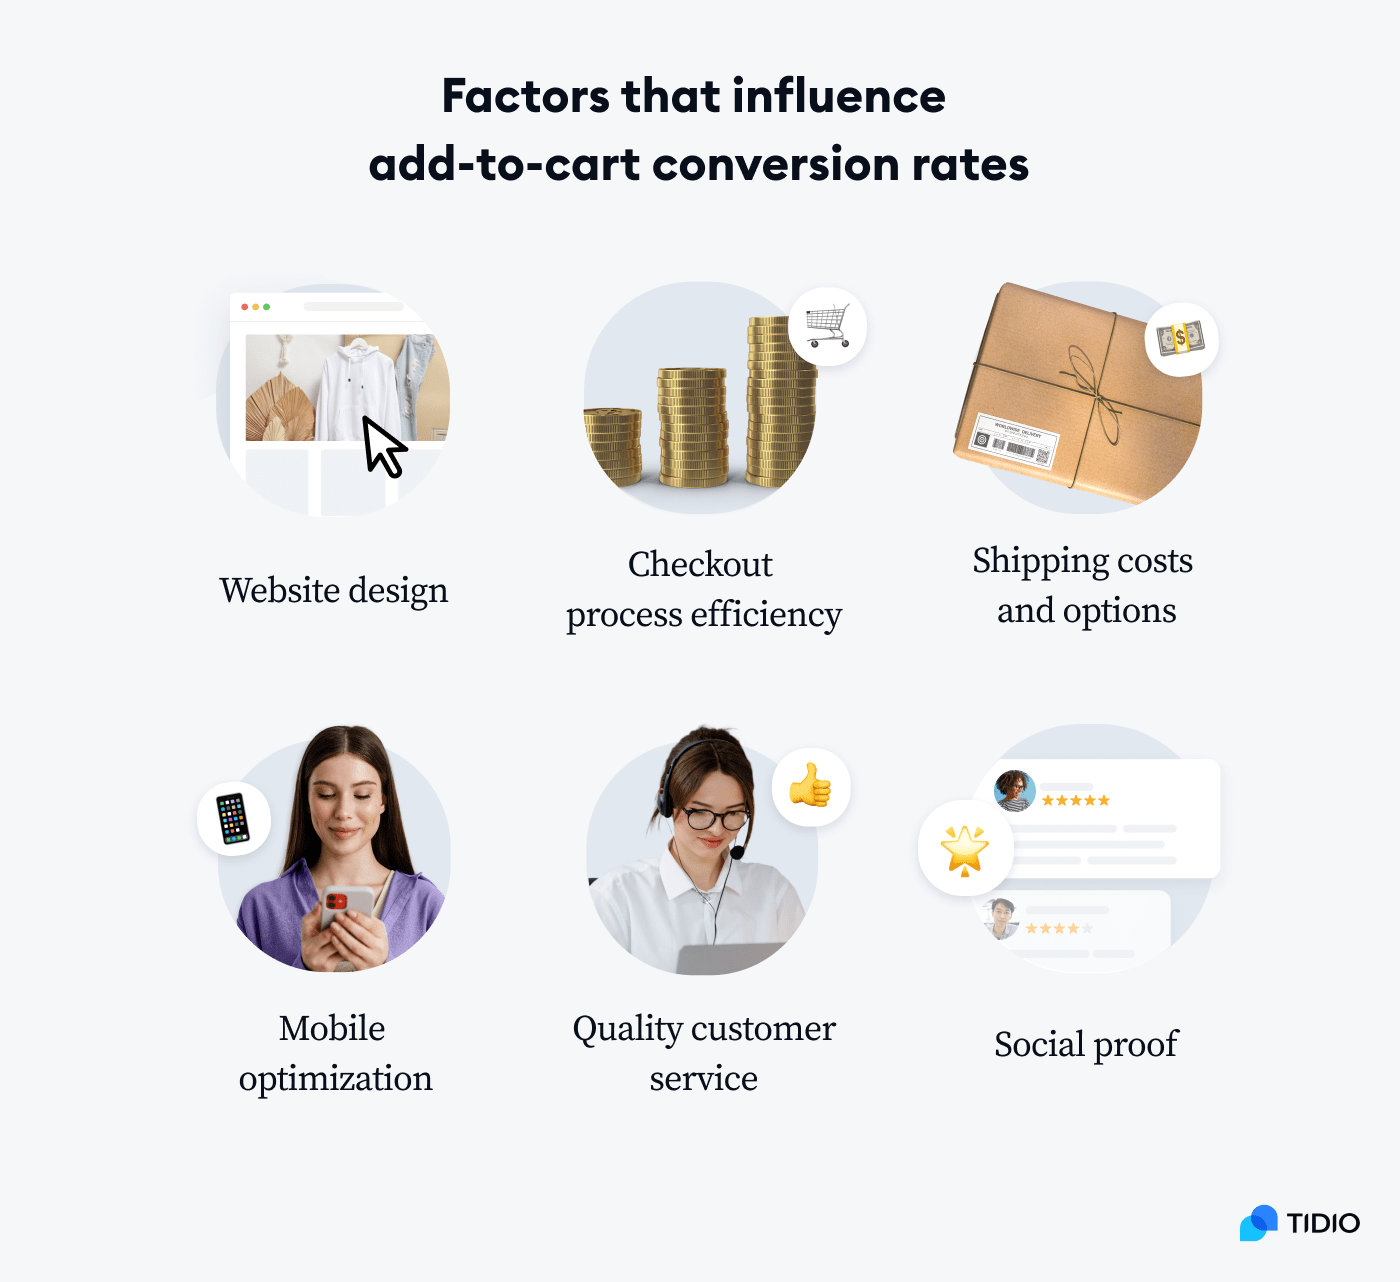 factors that influence add-to-cart conversion rates on image